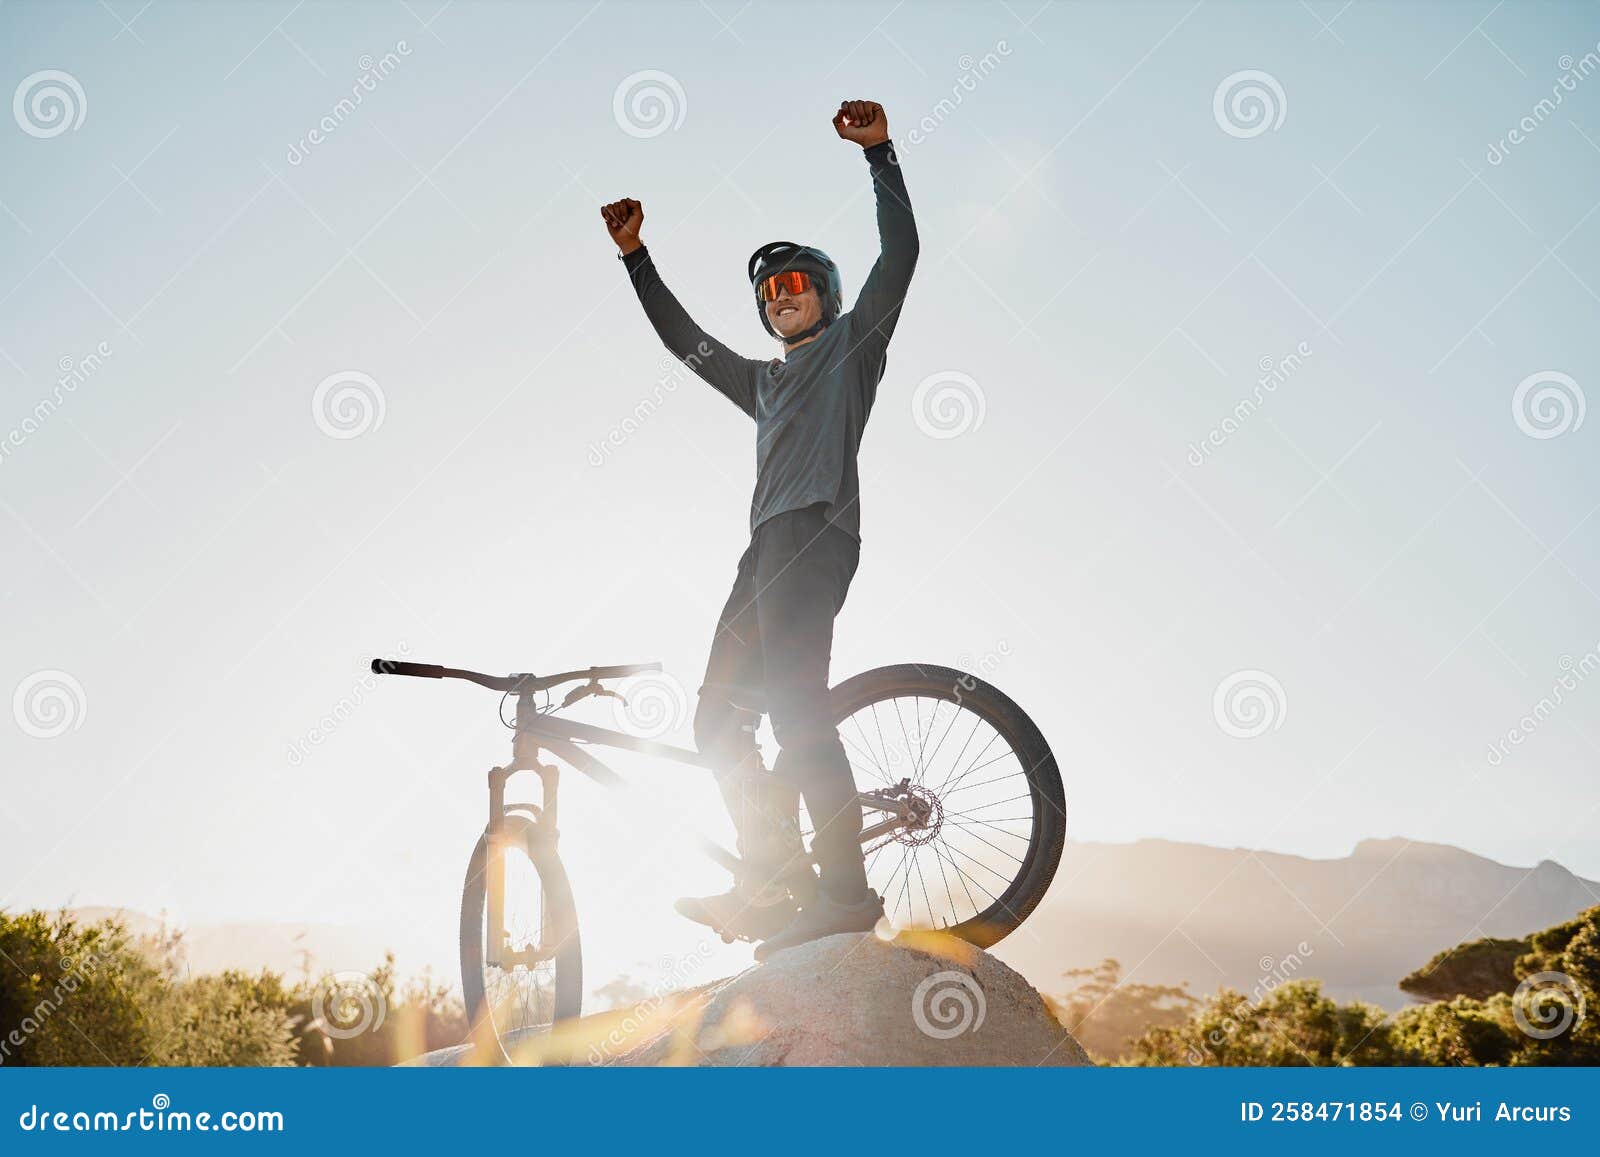 Mountain Bike Winner or Motorcycle Man with Success, Yes or Fist Pump